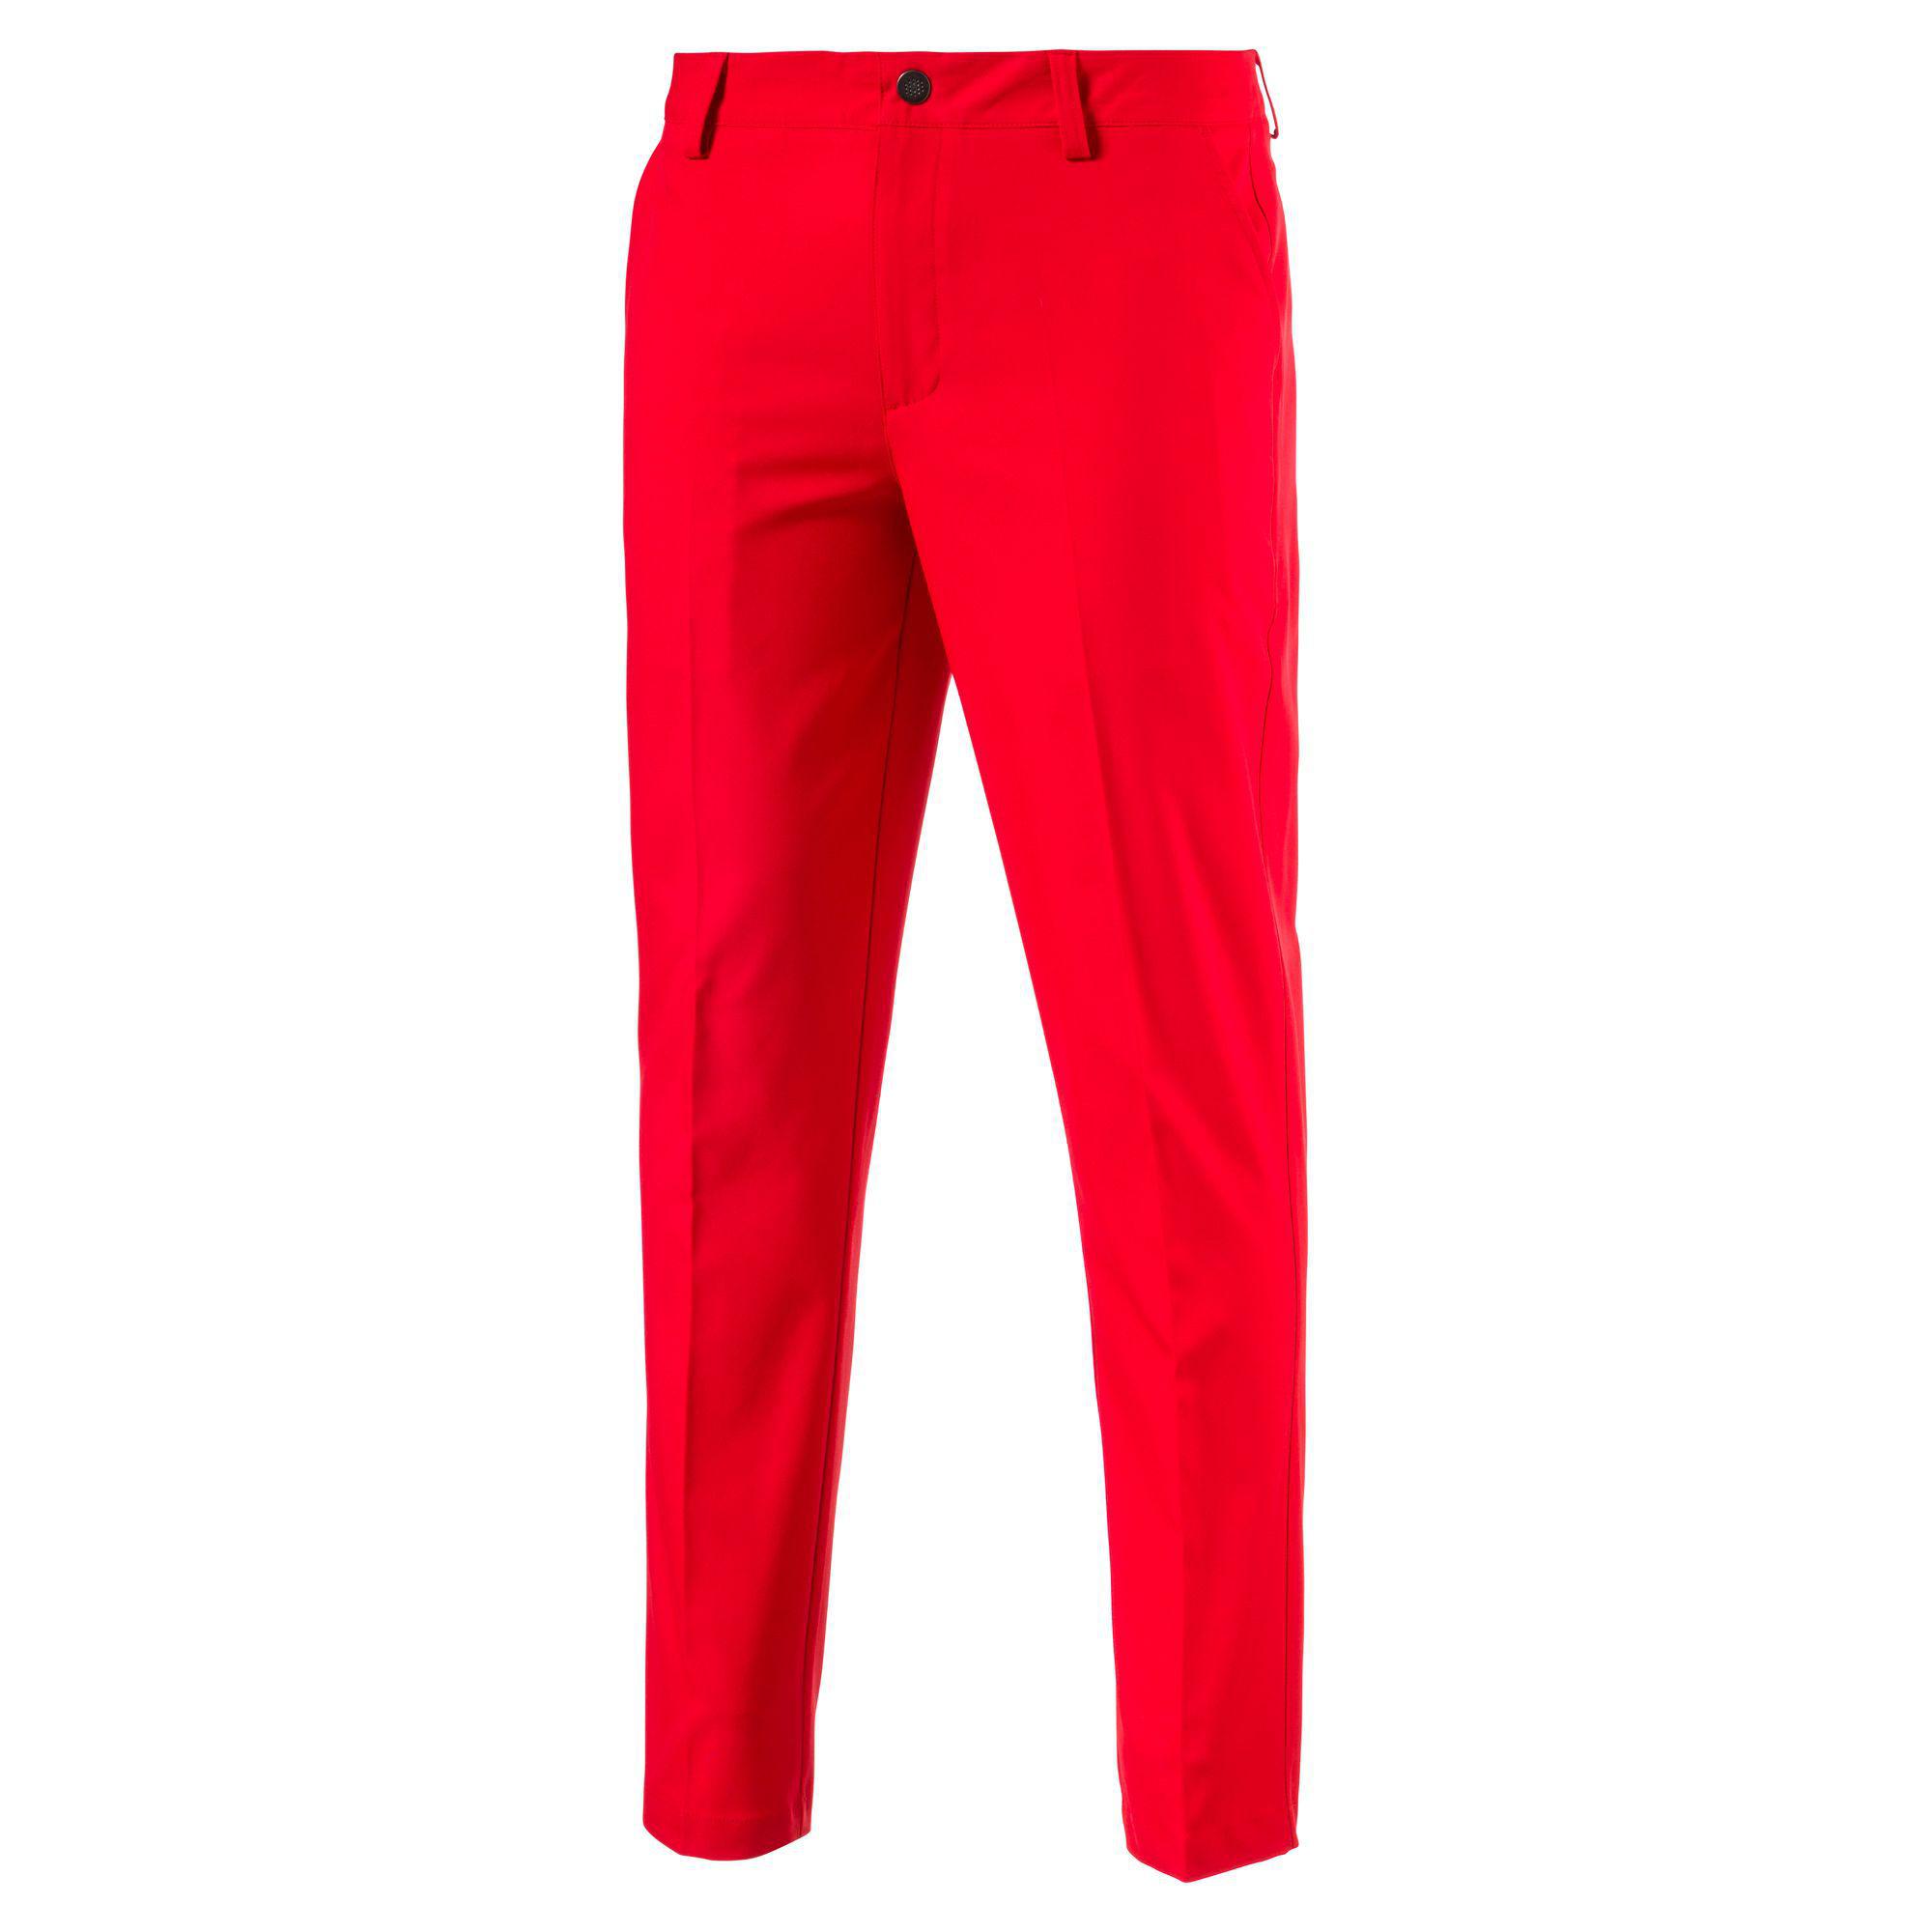 PUMA Tailored Tech Golf Pants in Red for Men - Lyst